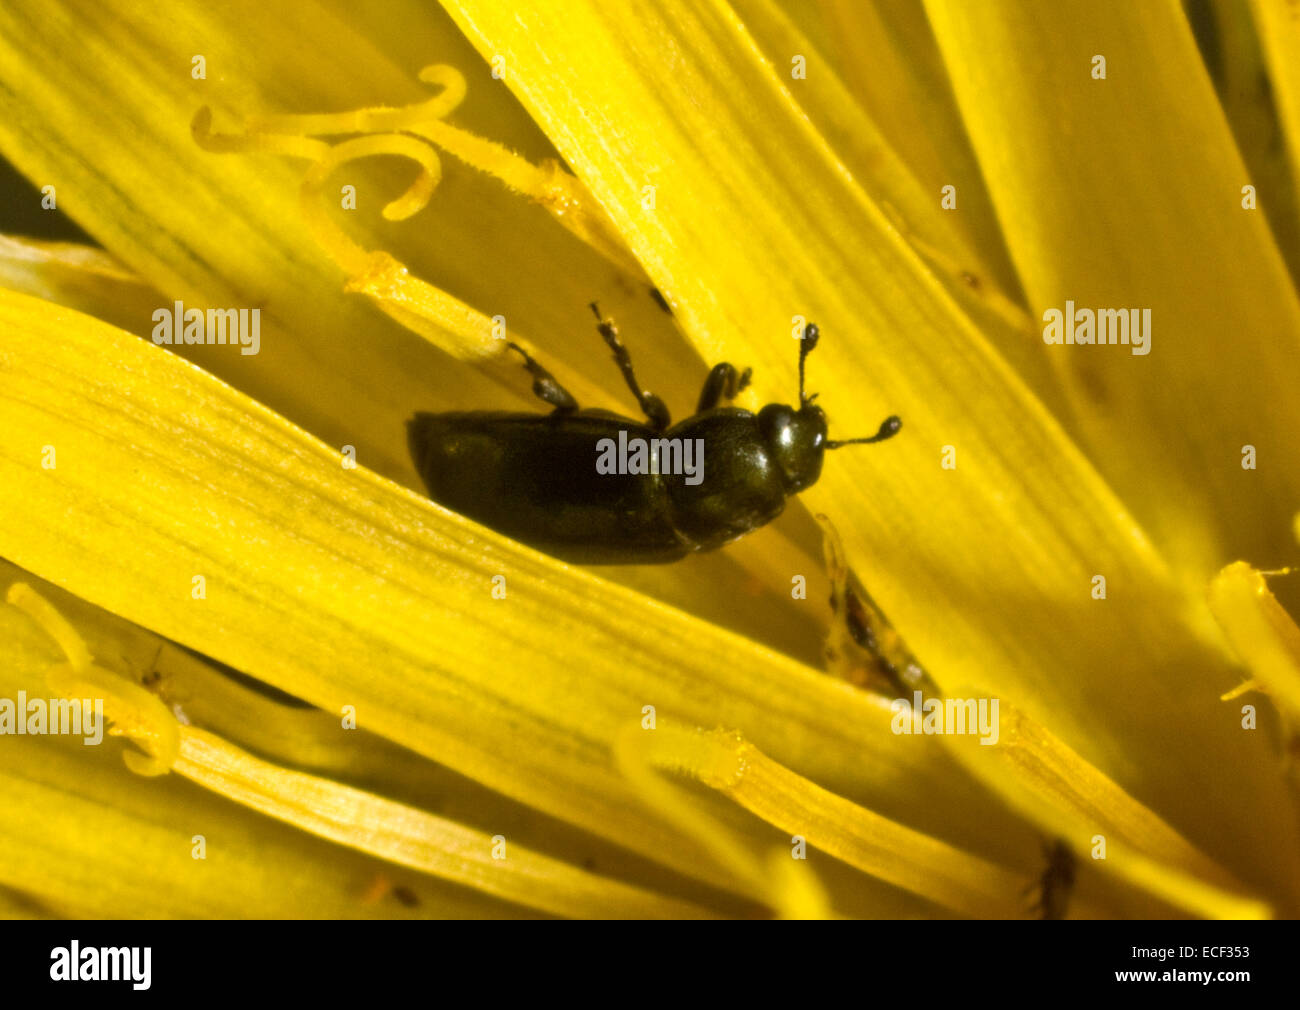 Photomicrograph of a pollen beetle, Brassicogethes aeneus, on a yellow composite flower Stock Photo